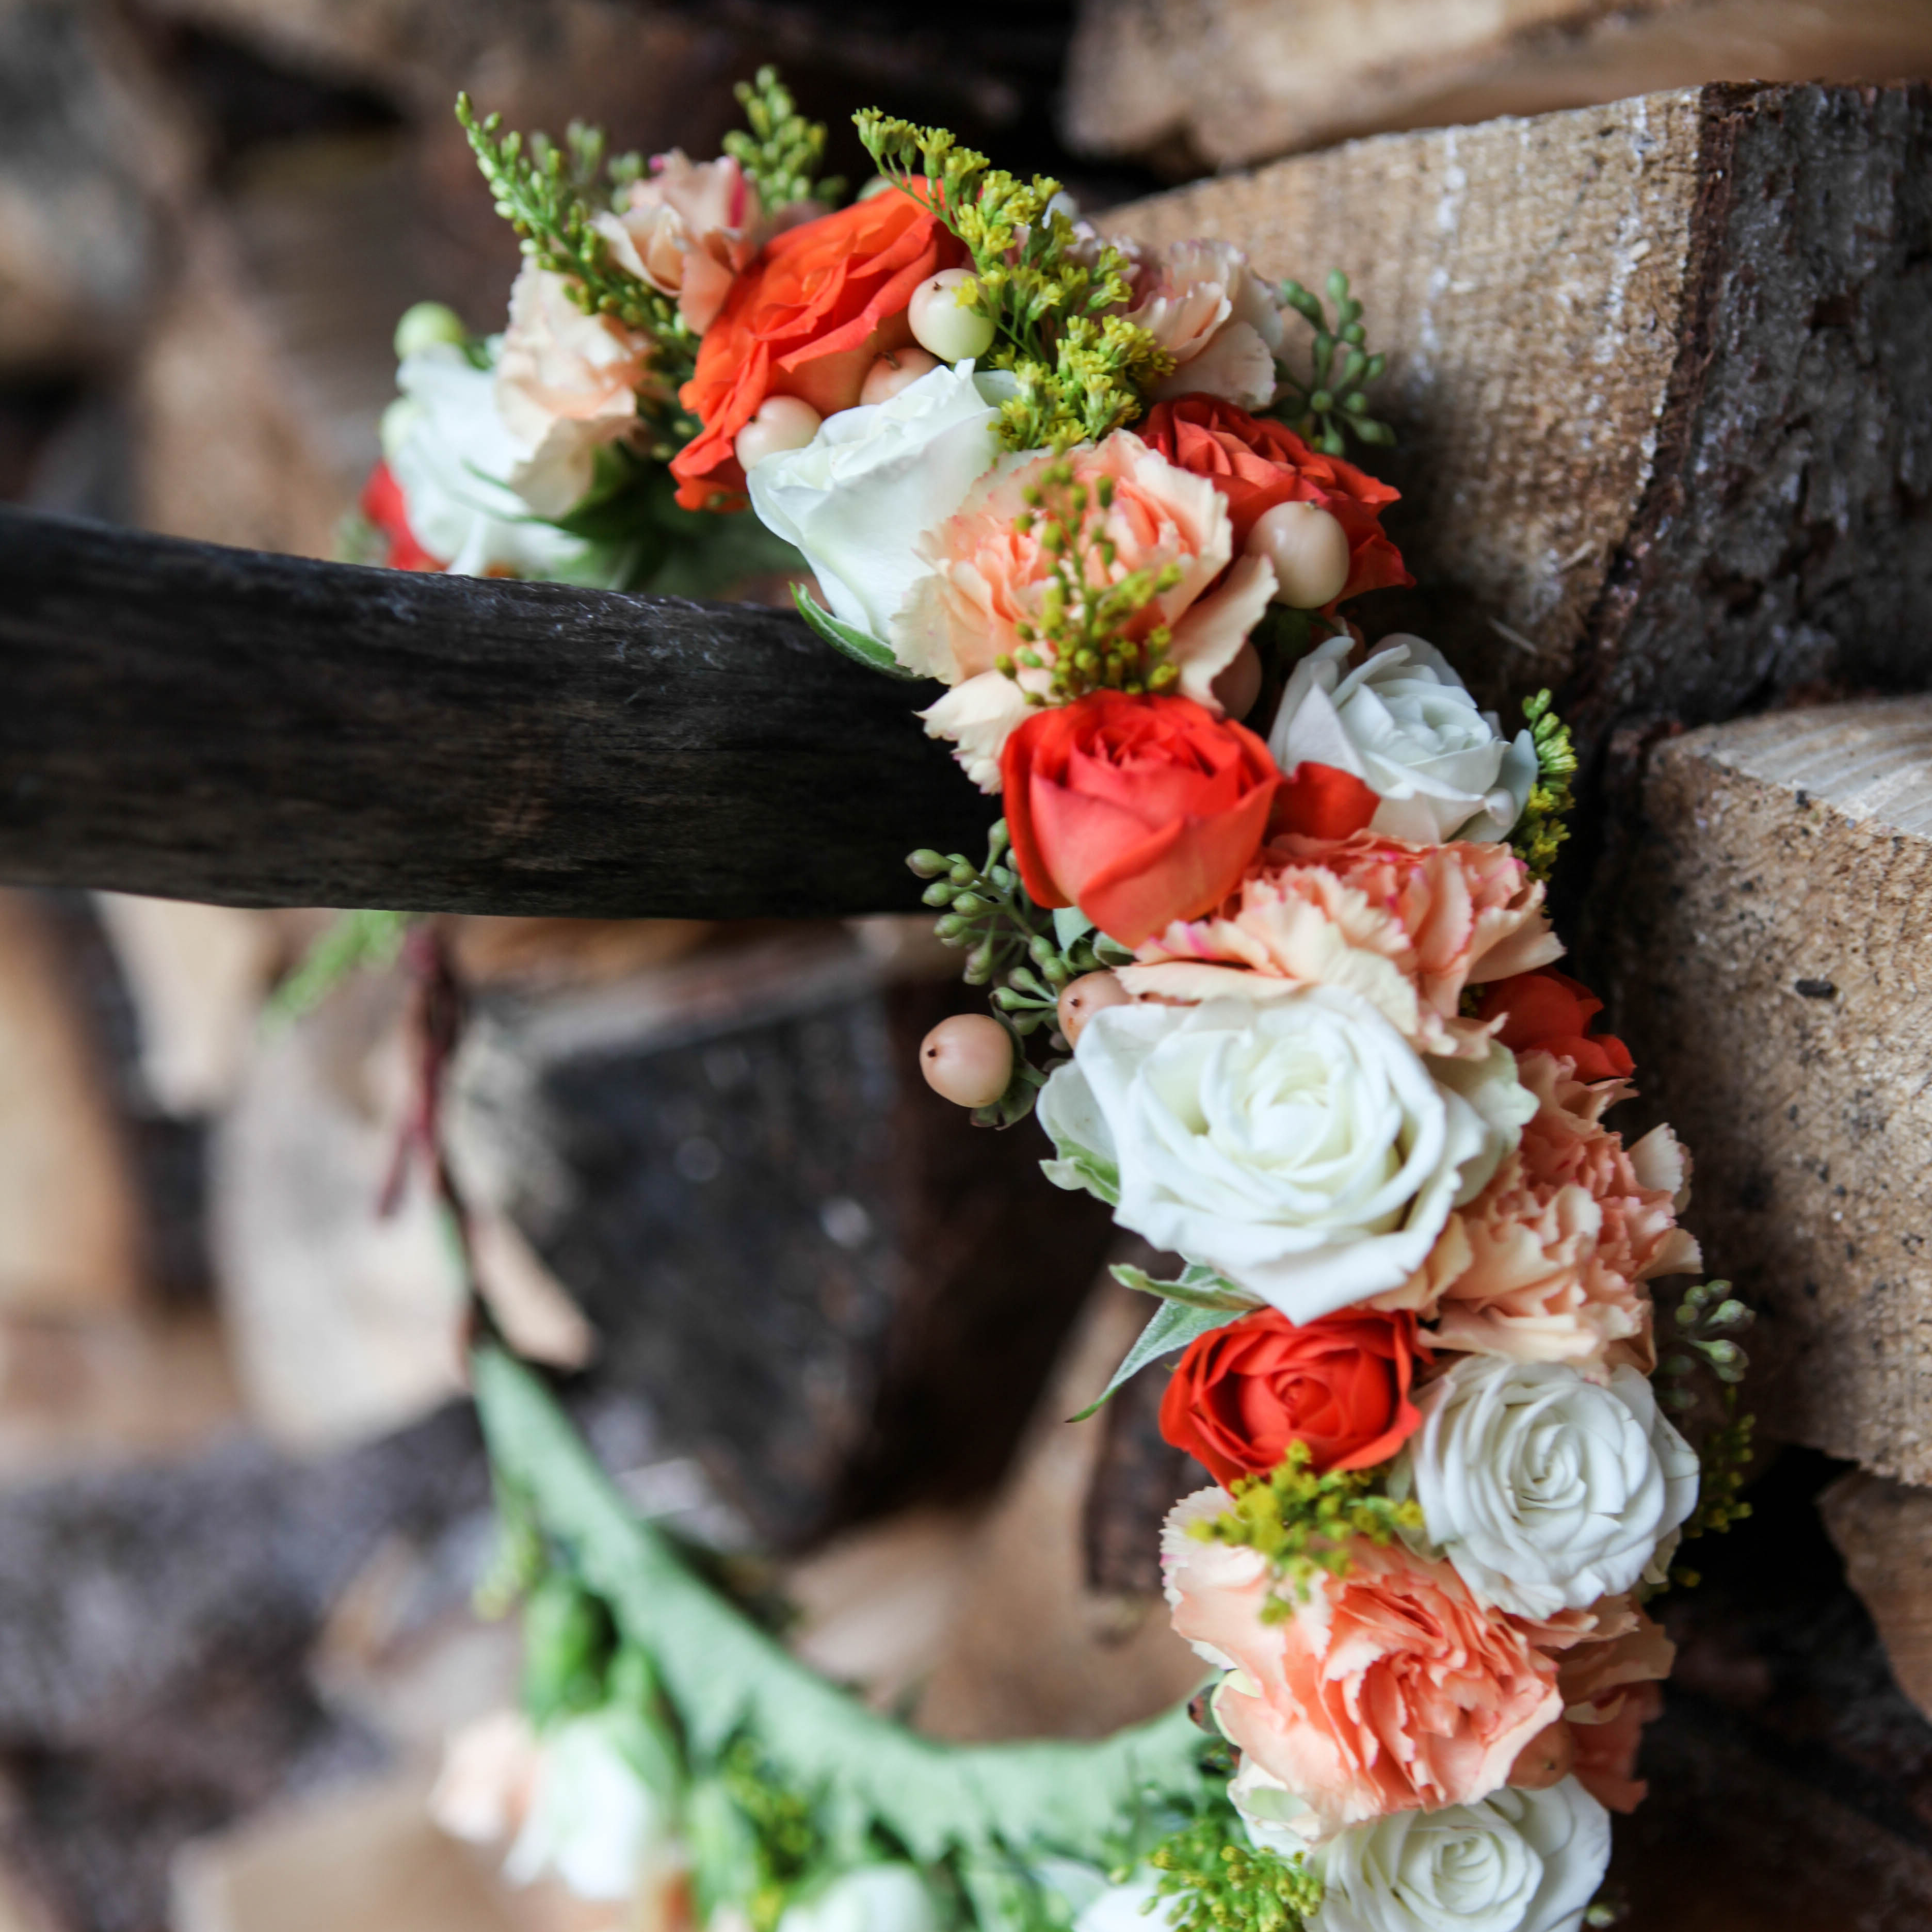 Full-sized flower crown with spray roses | designed by Natasha Price of Paper Peony